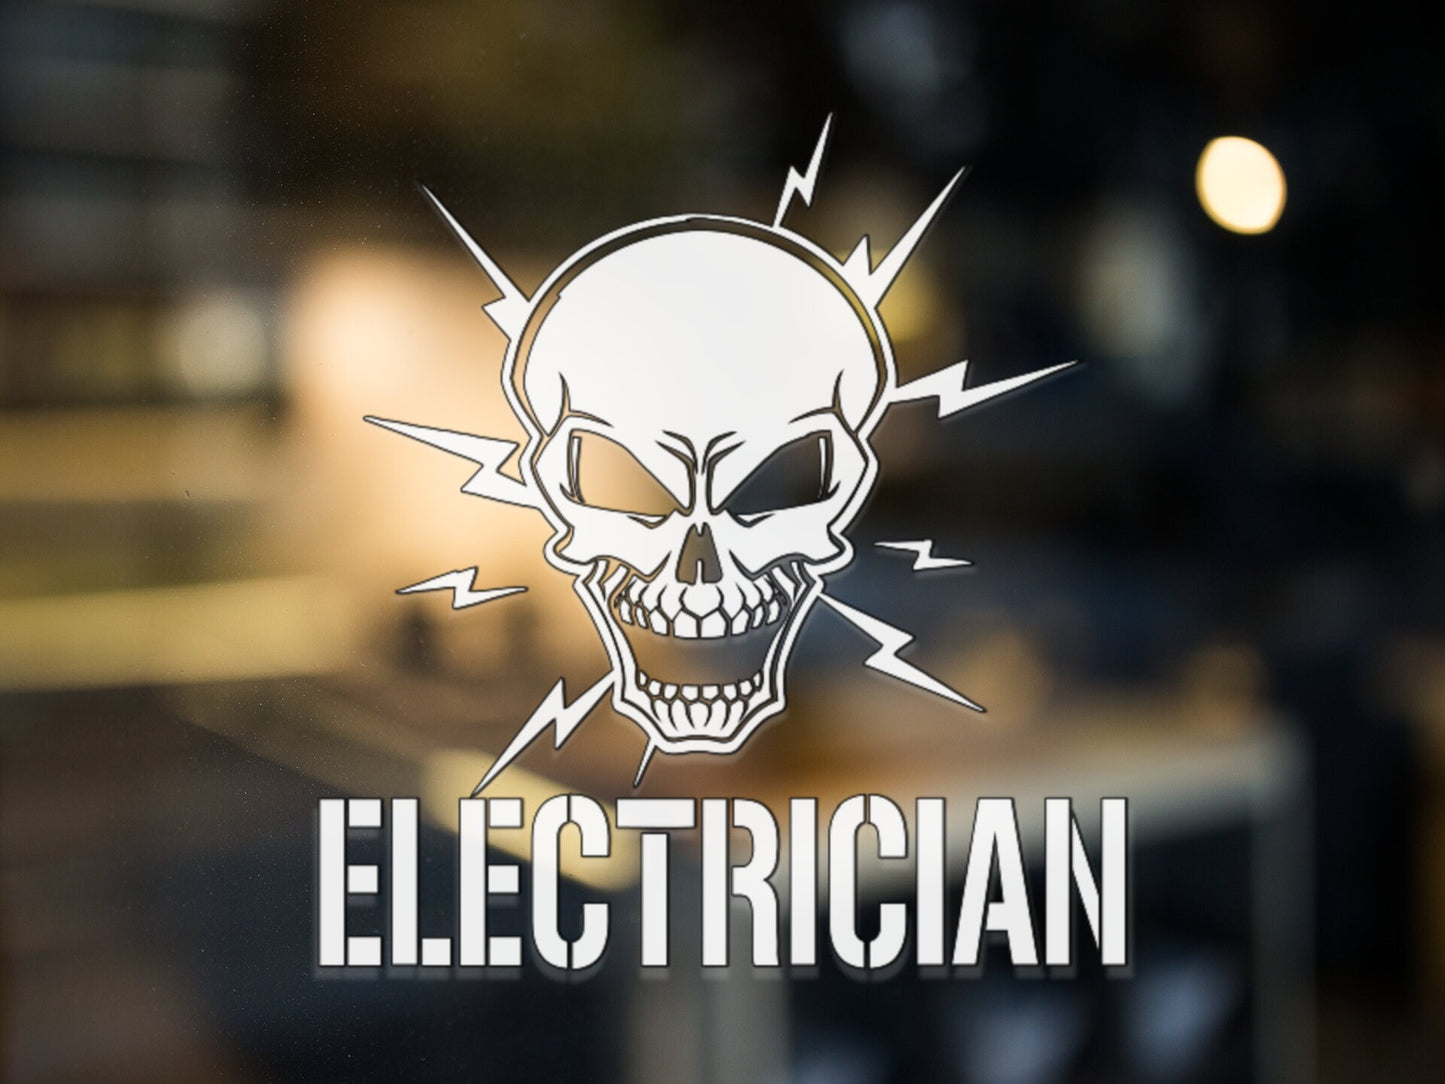 Electrician Skull Decal - Many Colors & Sizes